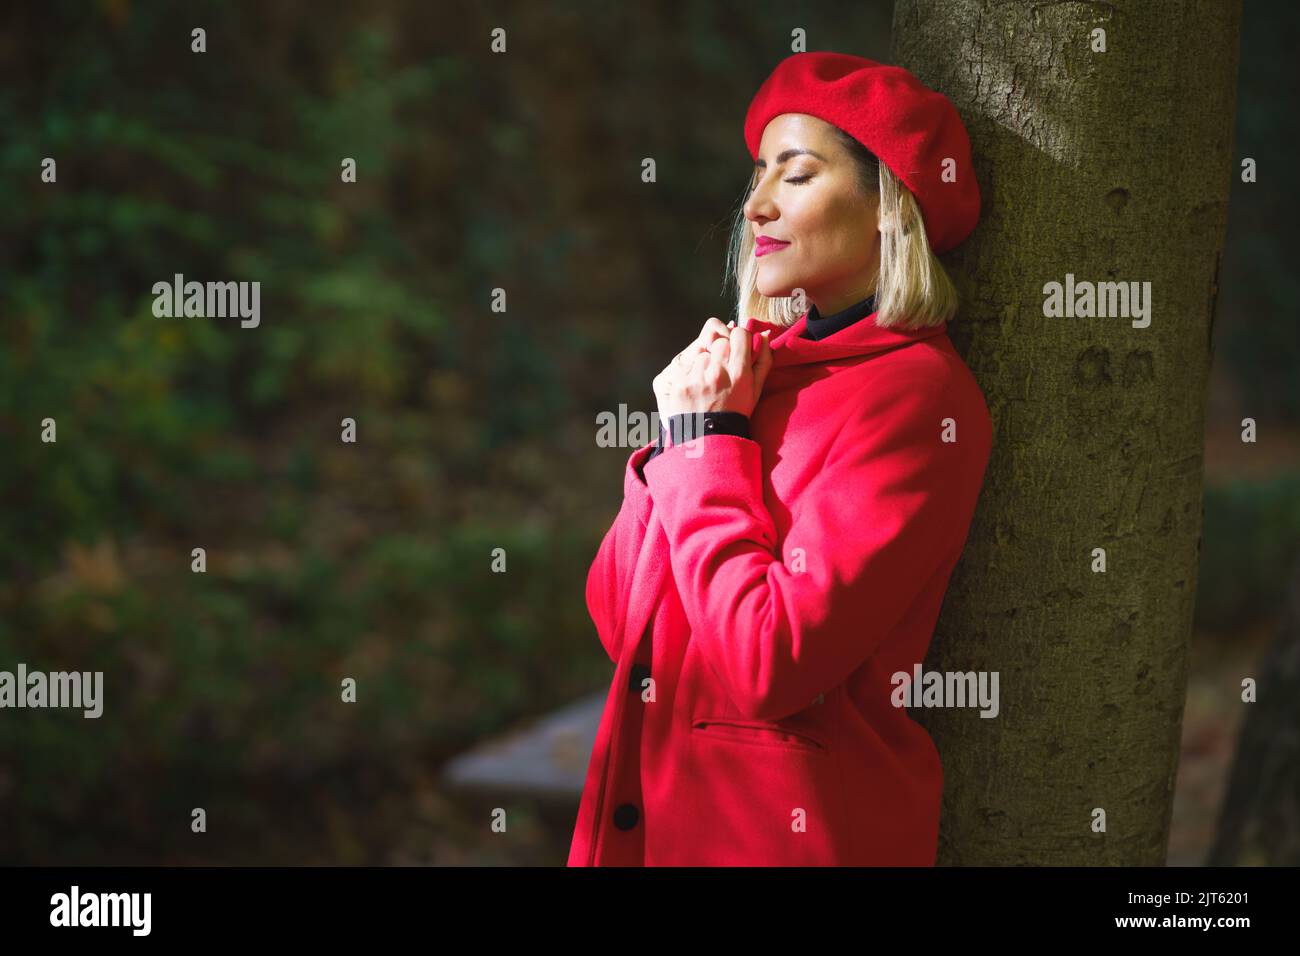 Gentle woman in red beret and coat leaning on tree Stock Photo